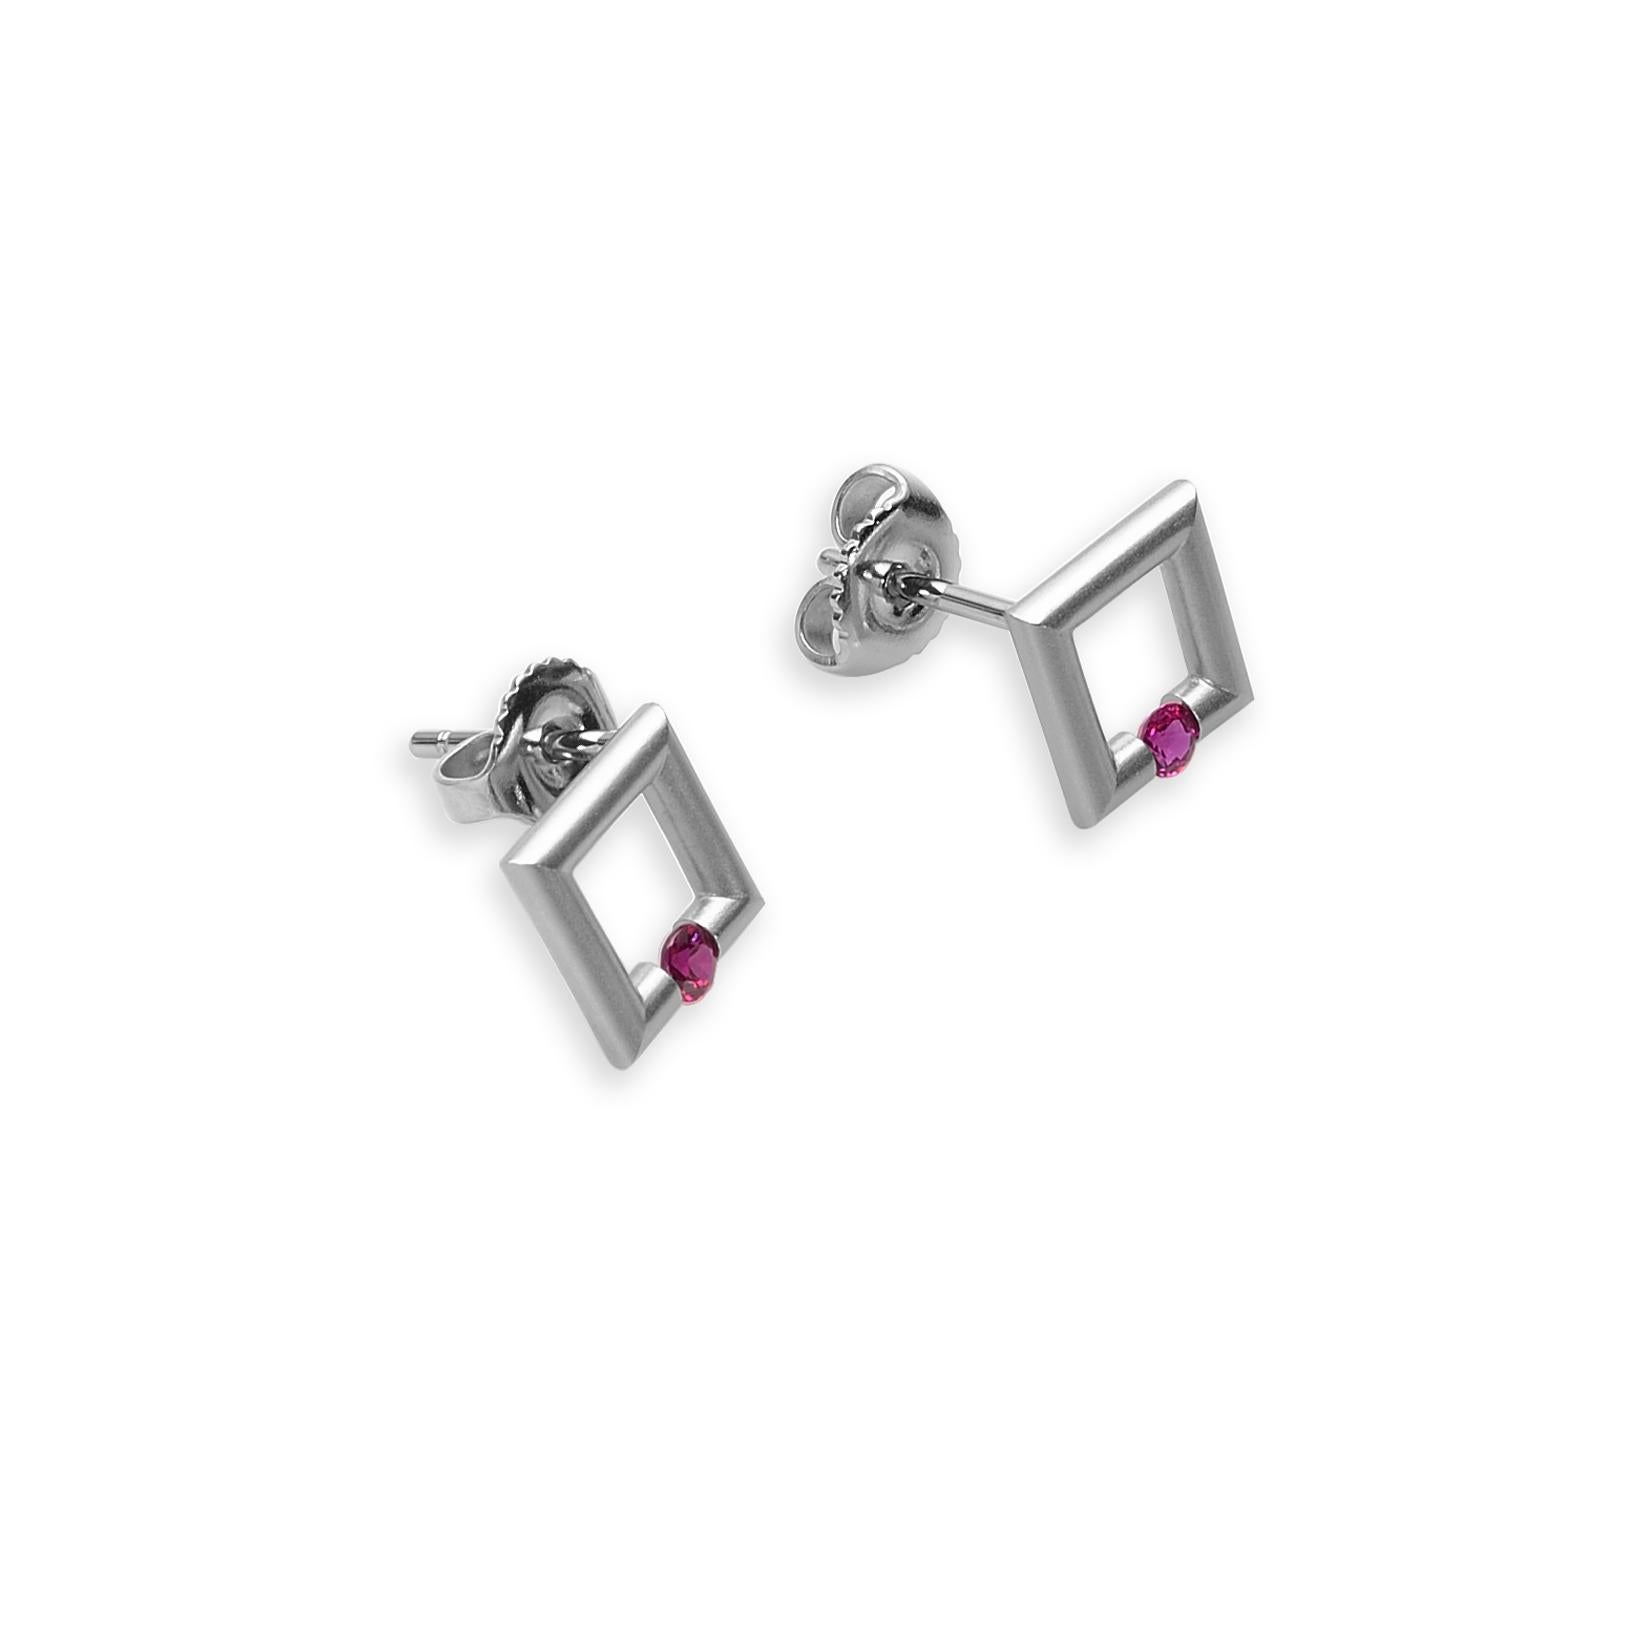 The Steven Kretchmer Micro-Square stud earrings are handcrafted in platinum with a matte finish. Each earring features a tension-set 2.5mm round ruby (0.14ctw.). The rubies are a vibrant red with the classic ruby pink undertone. Platinum friction